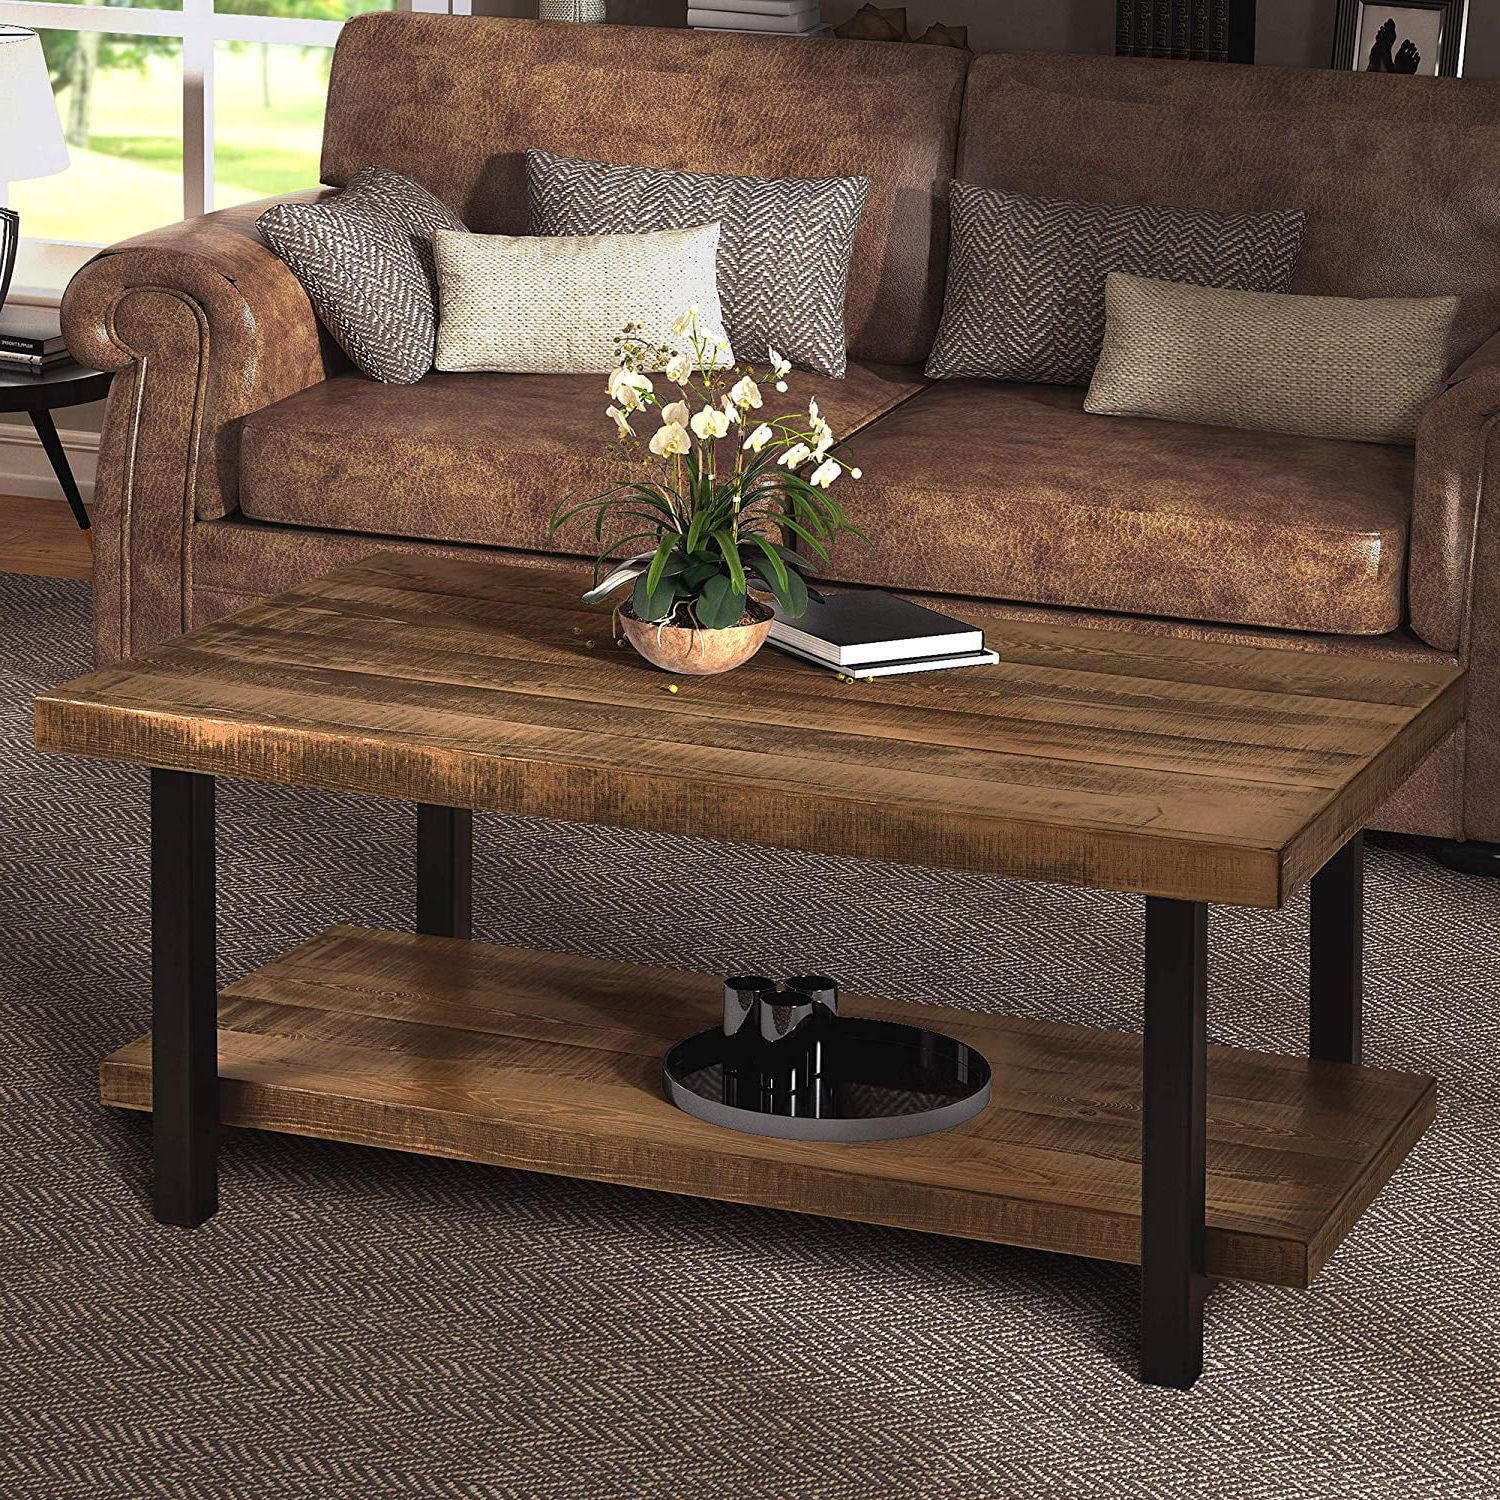 Harper&bright Designs Industrial Rectangular Pine Wood Coffee Table For Most Popular Brown Rustic Coffee Tables (Photo 8 of 15)